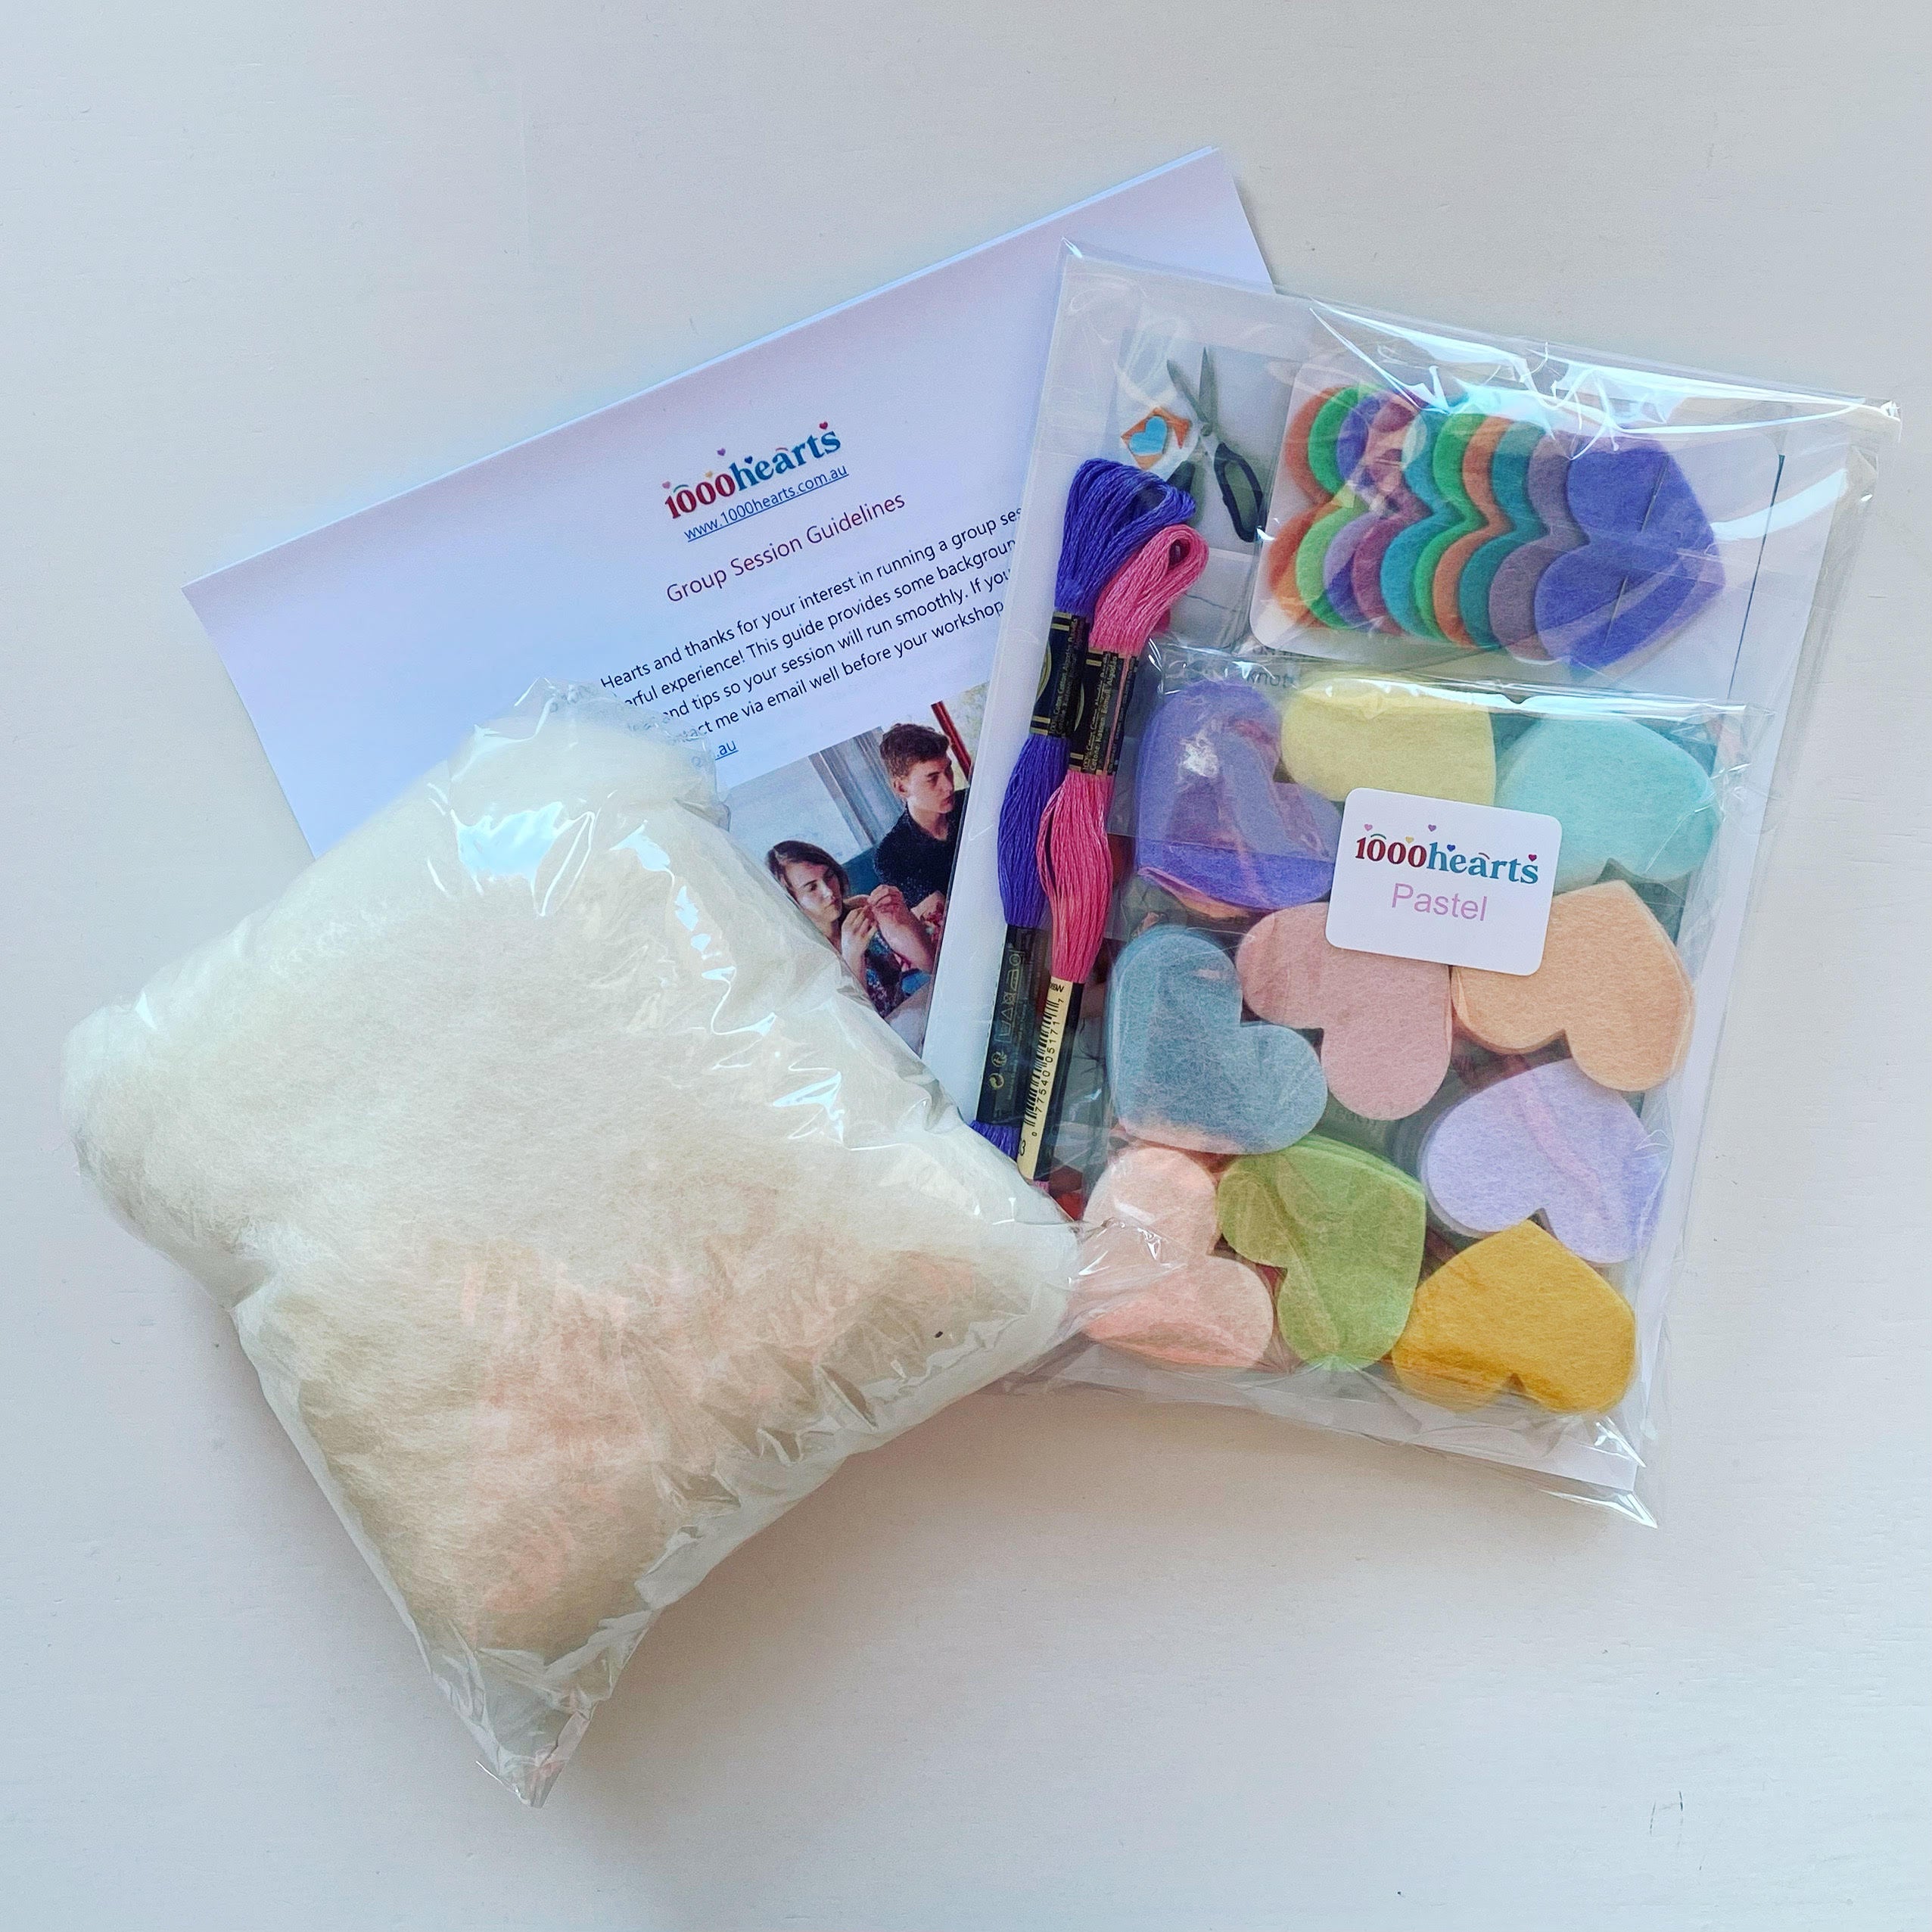 Group Heart-Making Kit with pre-cut hearts